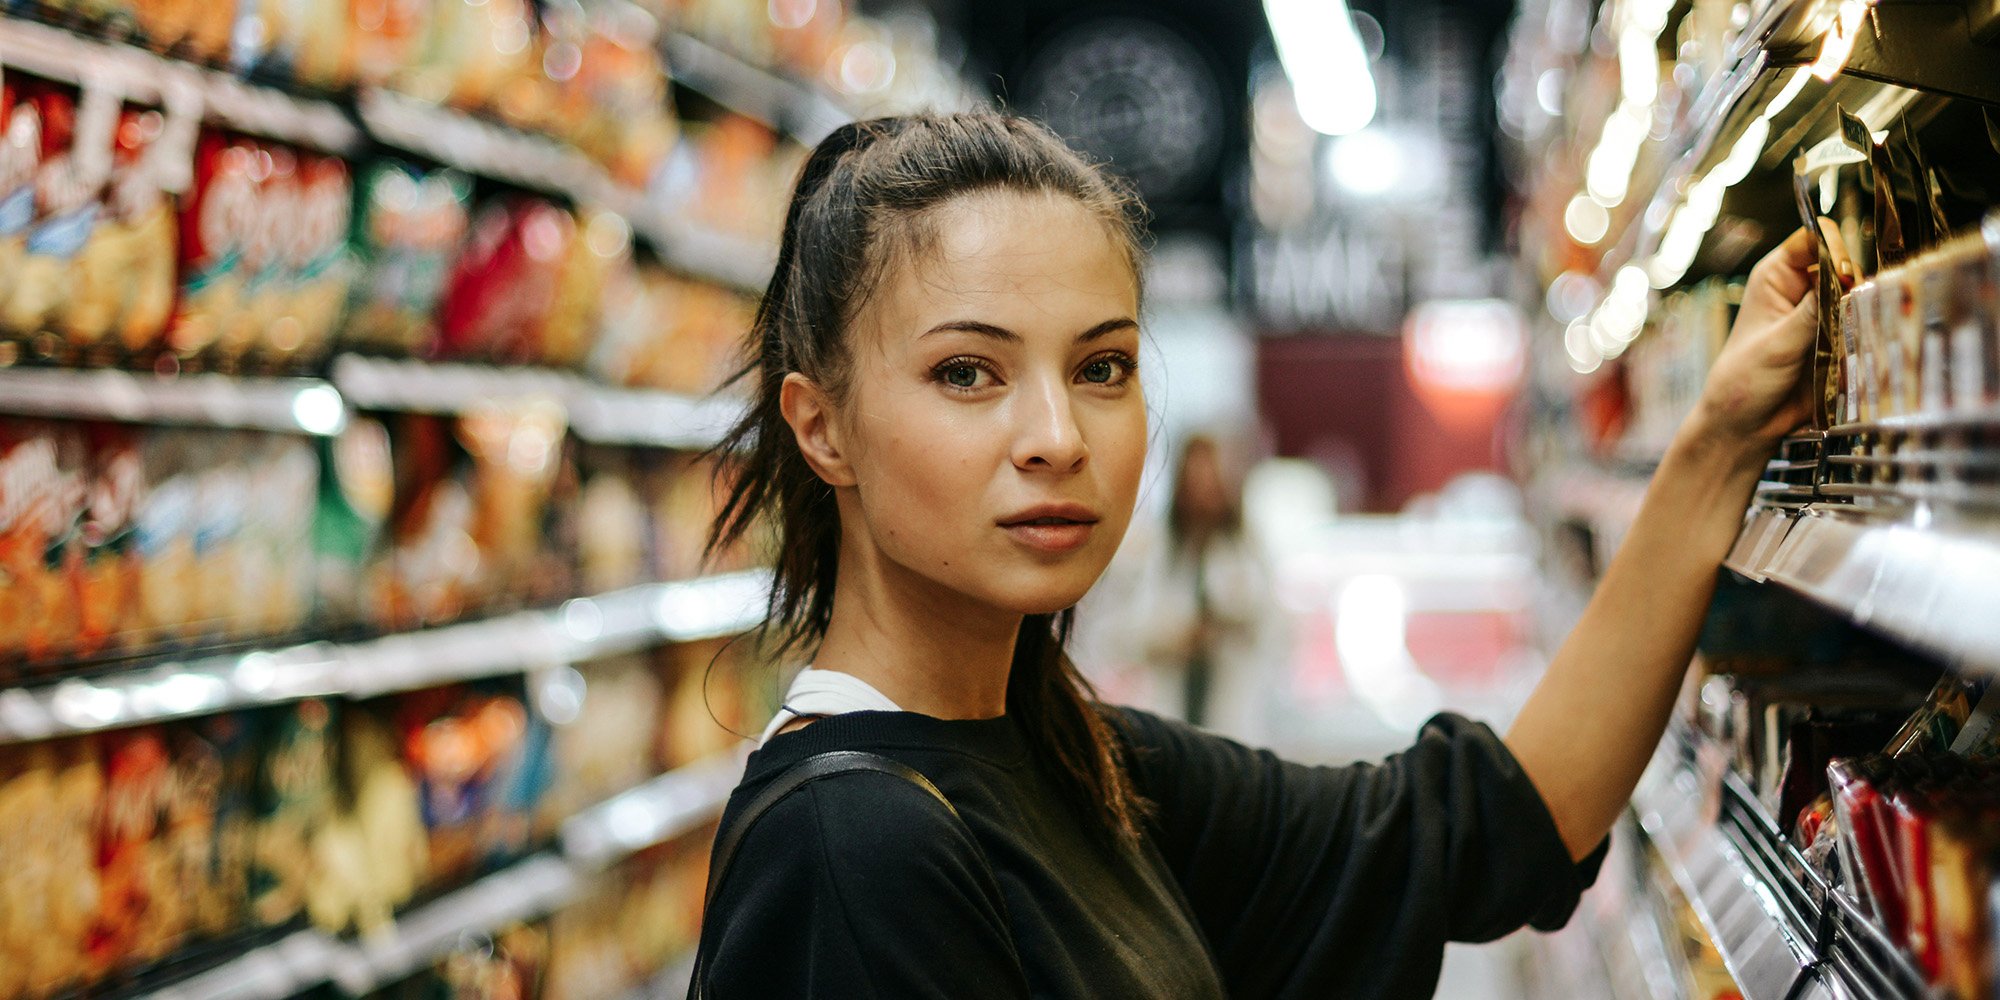 Indigenous Racial Profiling by Retailers and Tips to Avoid It